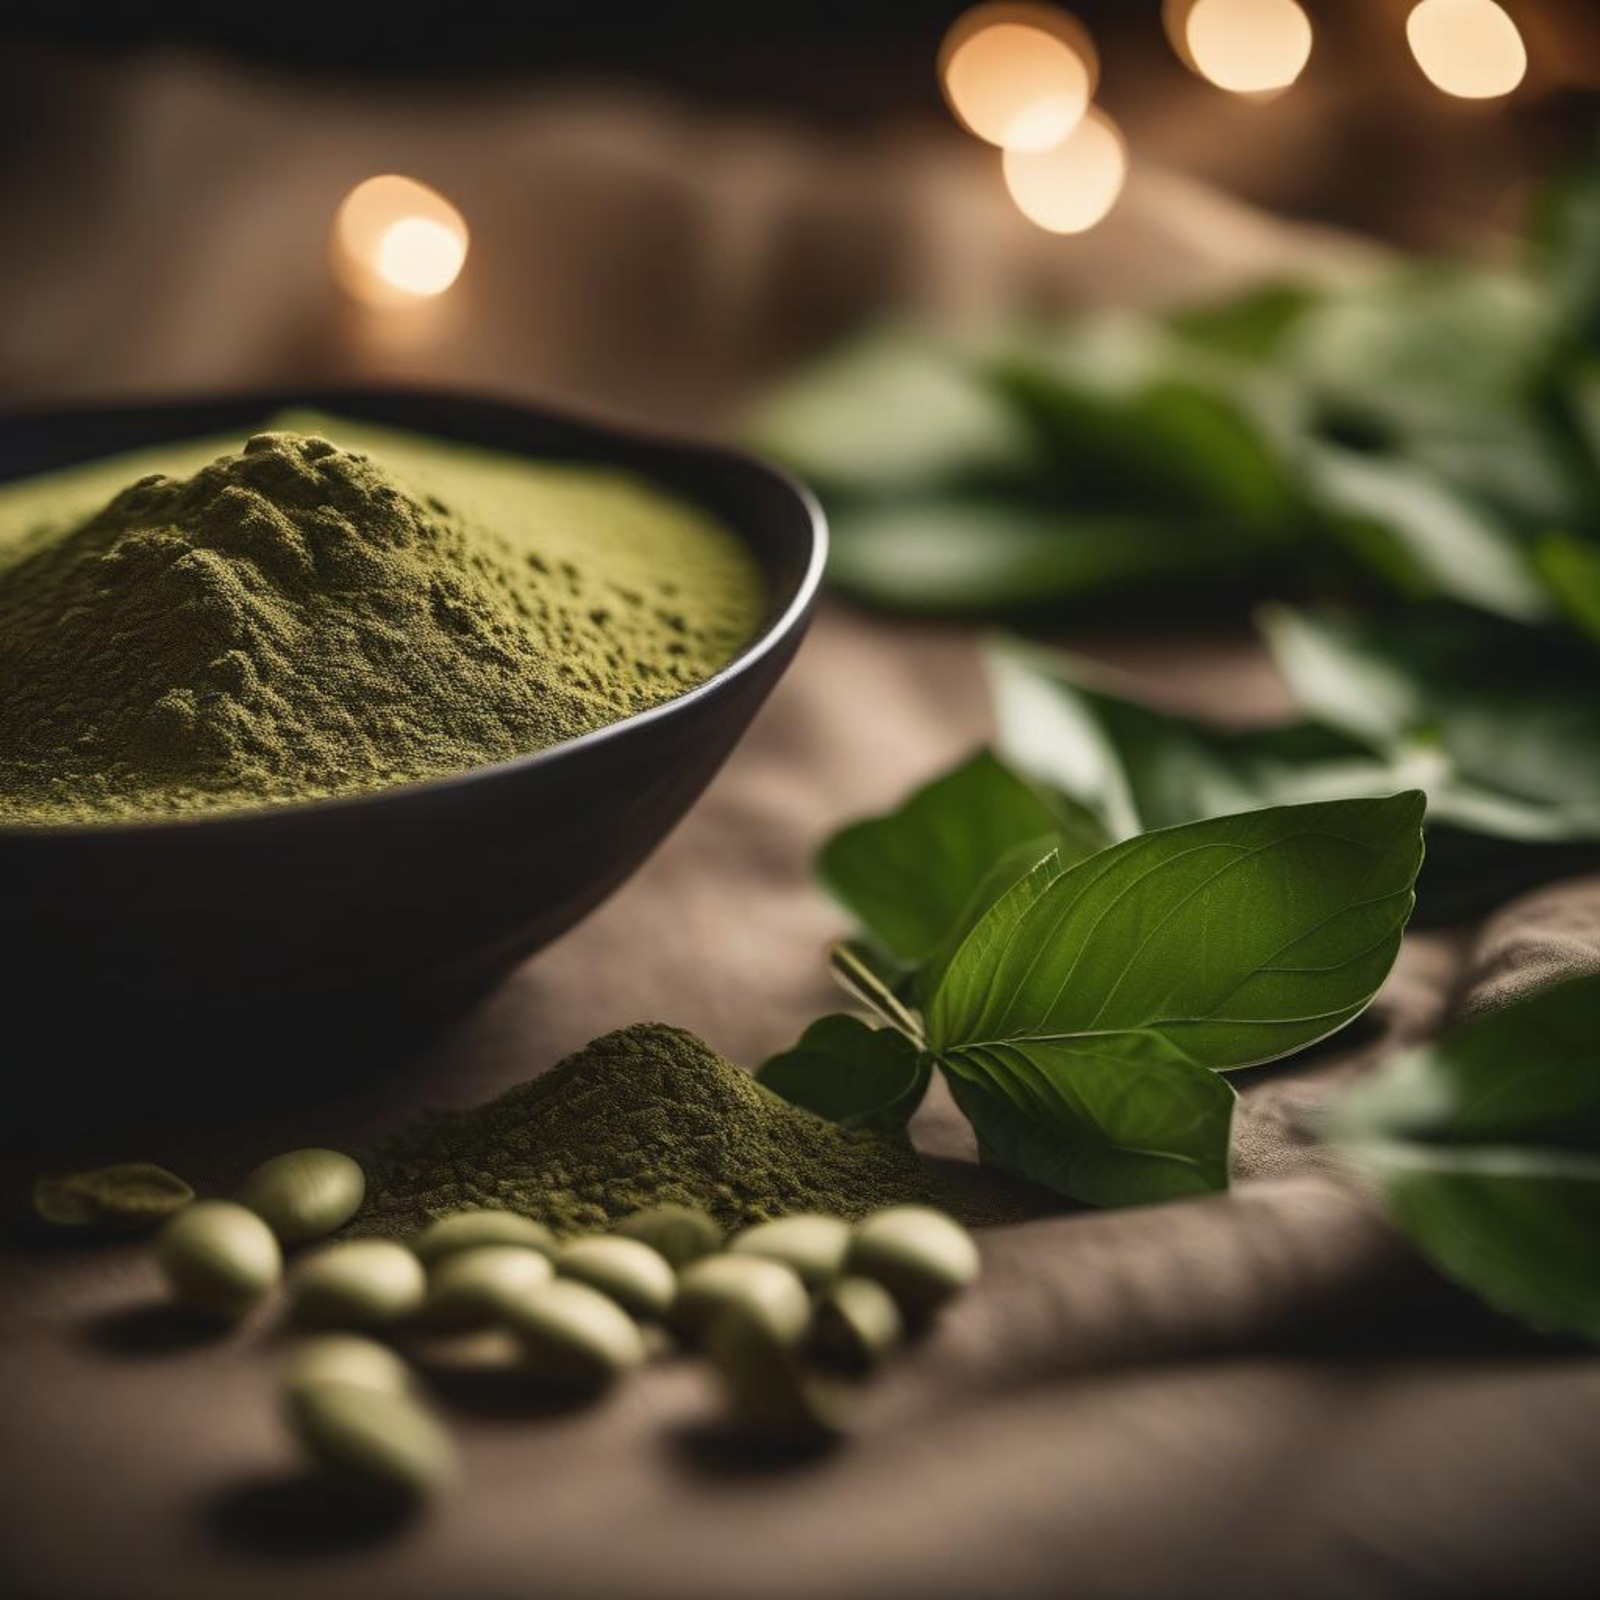 How long does Kratom stay in the body?